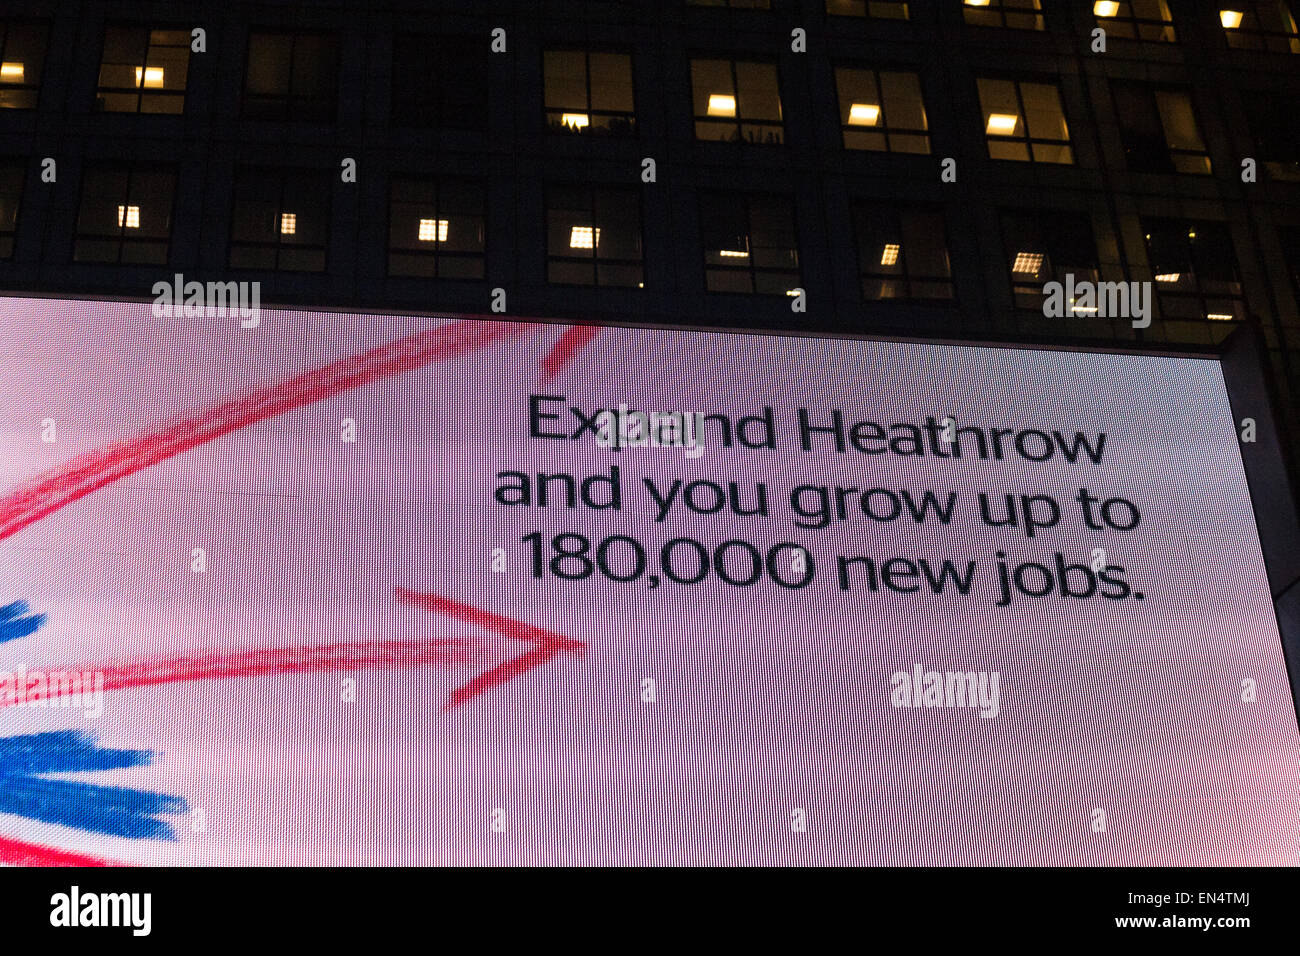 Expand Heathrow and you grow up to 180000 new jobs sign at Canary Wharf, London Stock Photo